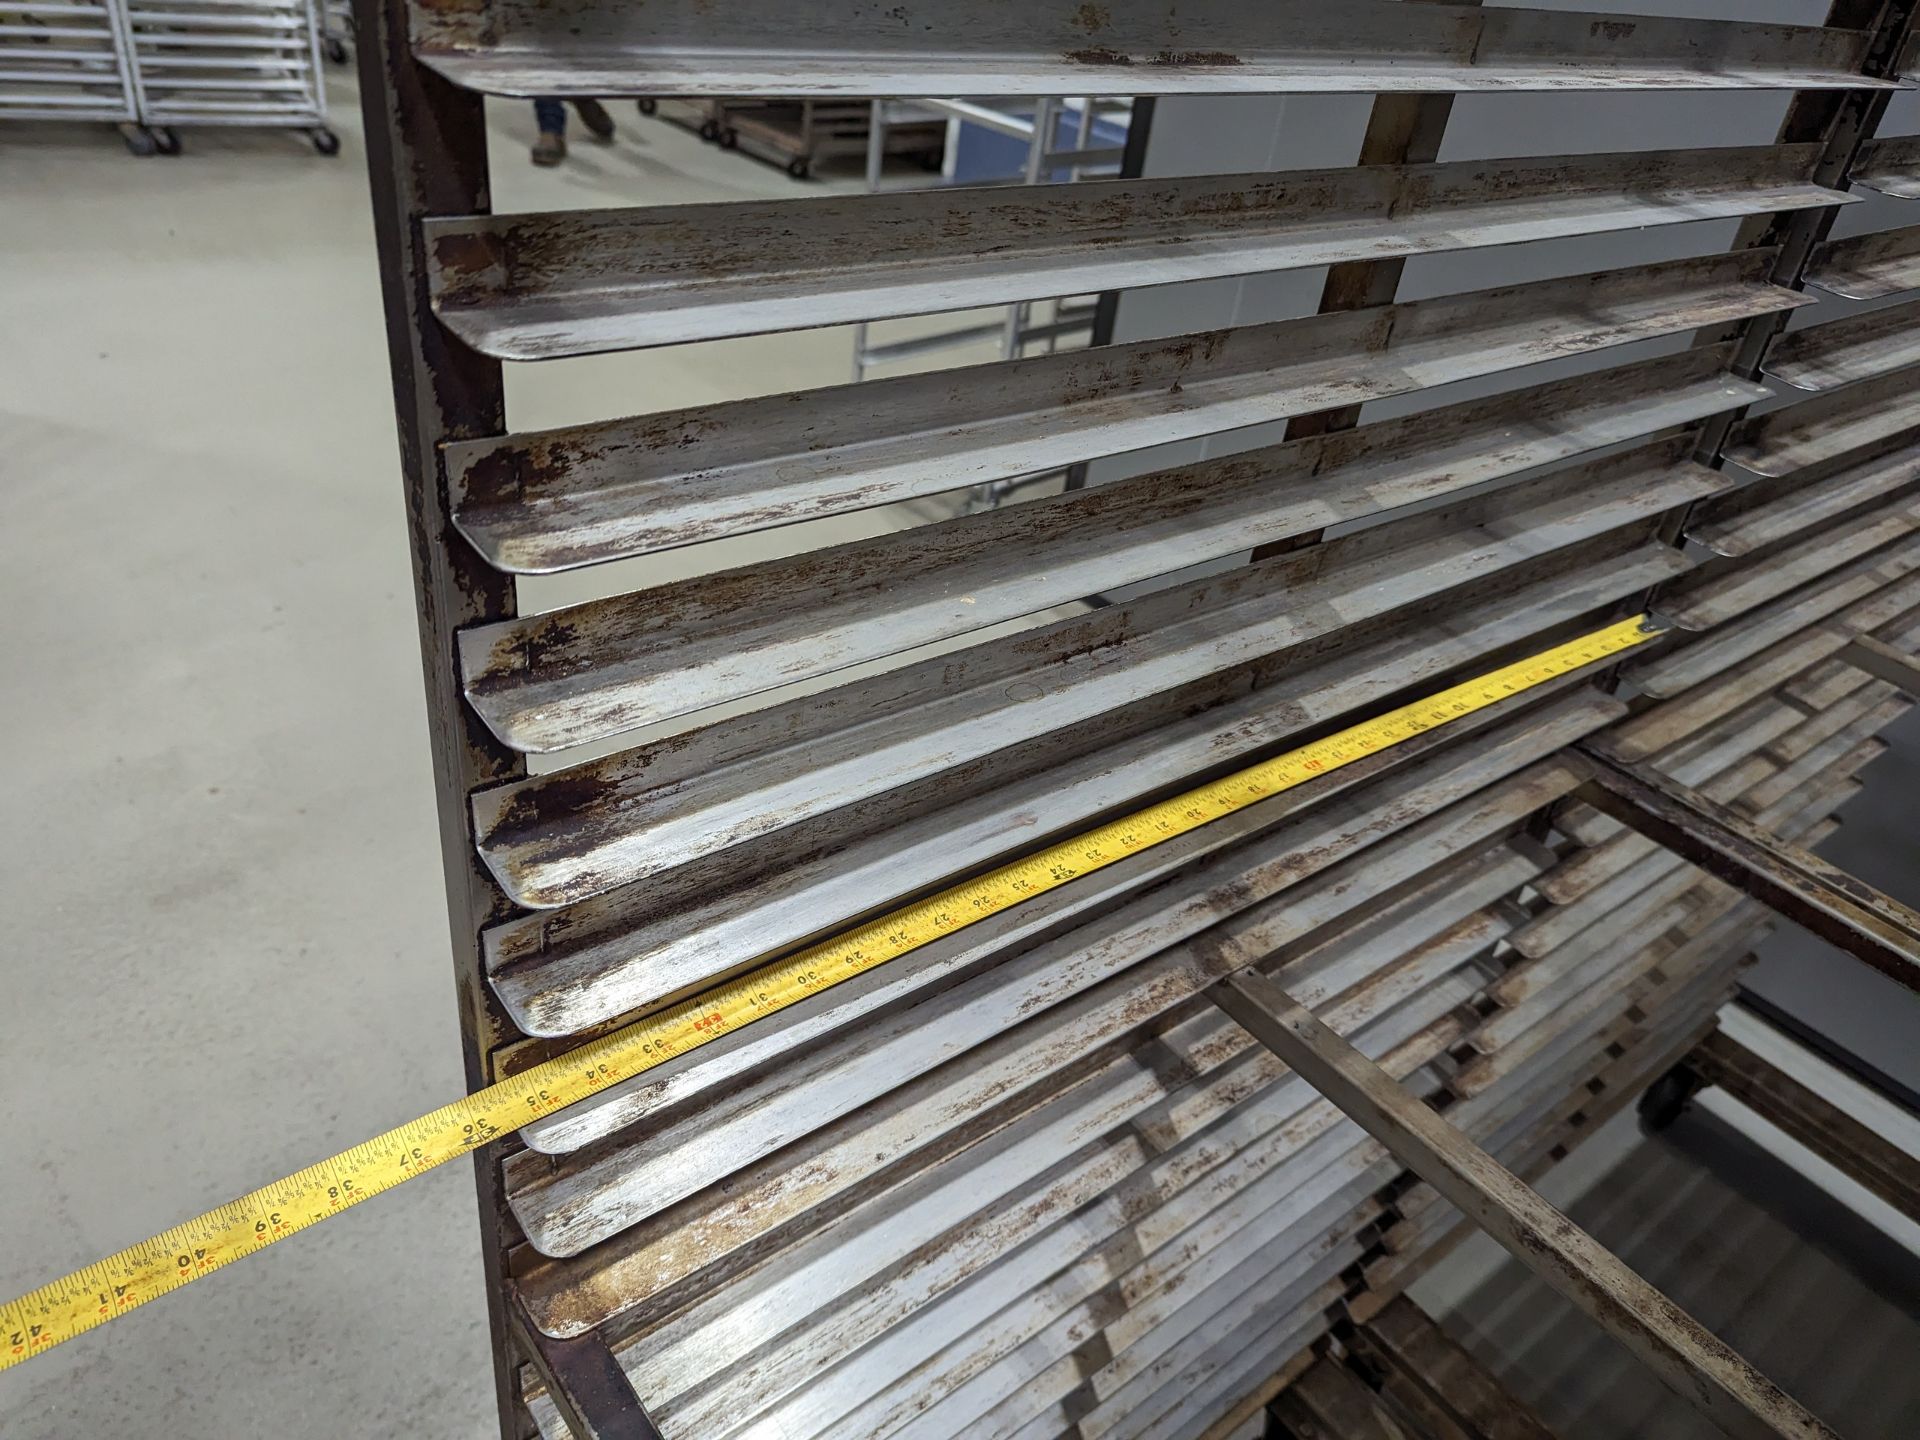 Lot of 4 Double Wide Stainless Steel Bakery Racks, Dimensions LxWxH: 72x57x69 Measurements are for l - Image 4 of 6